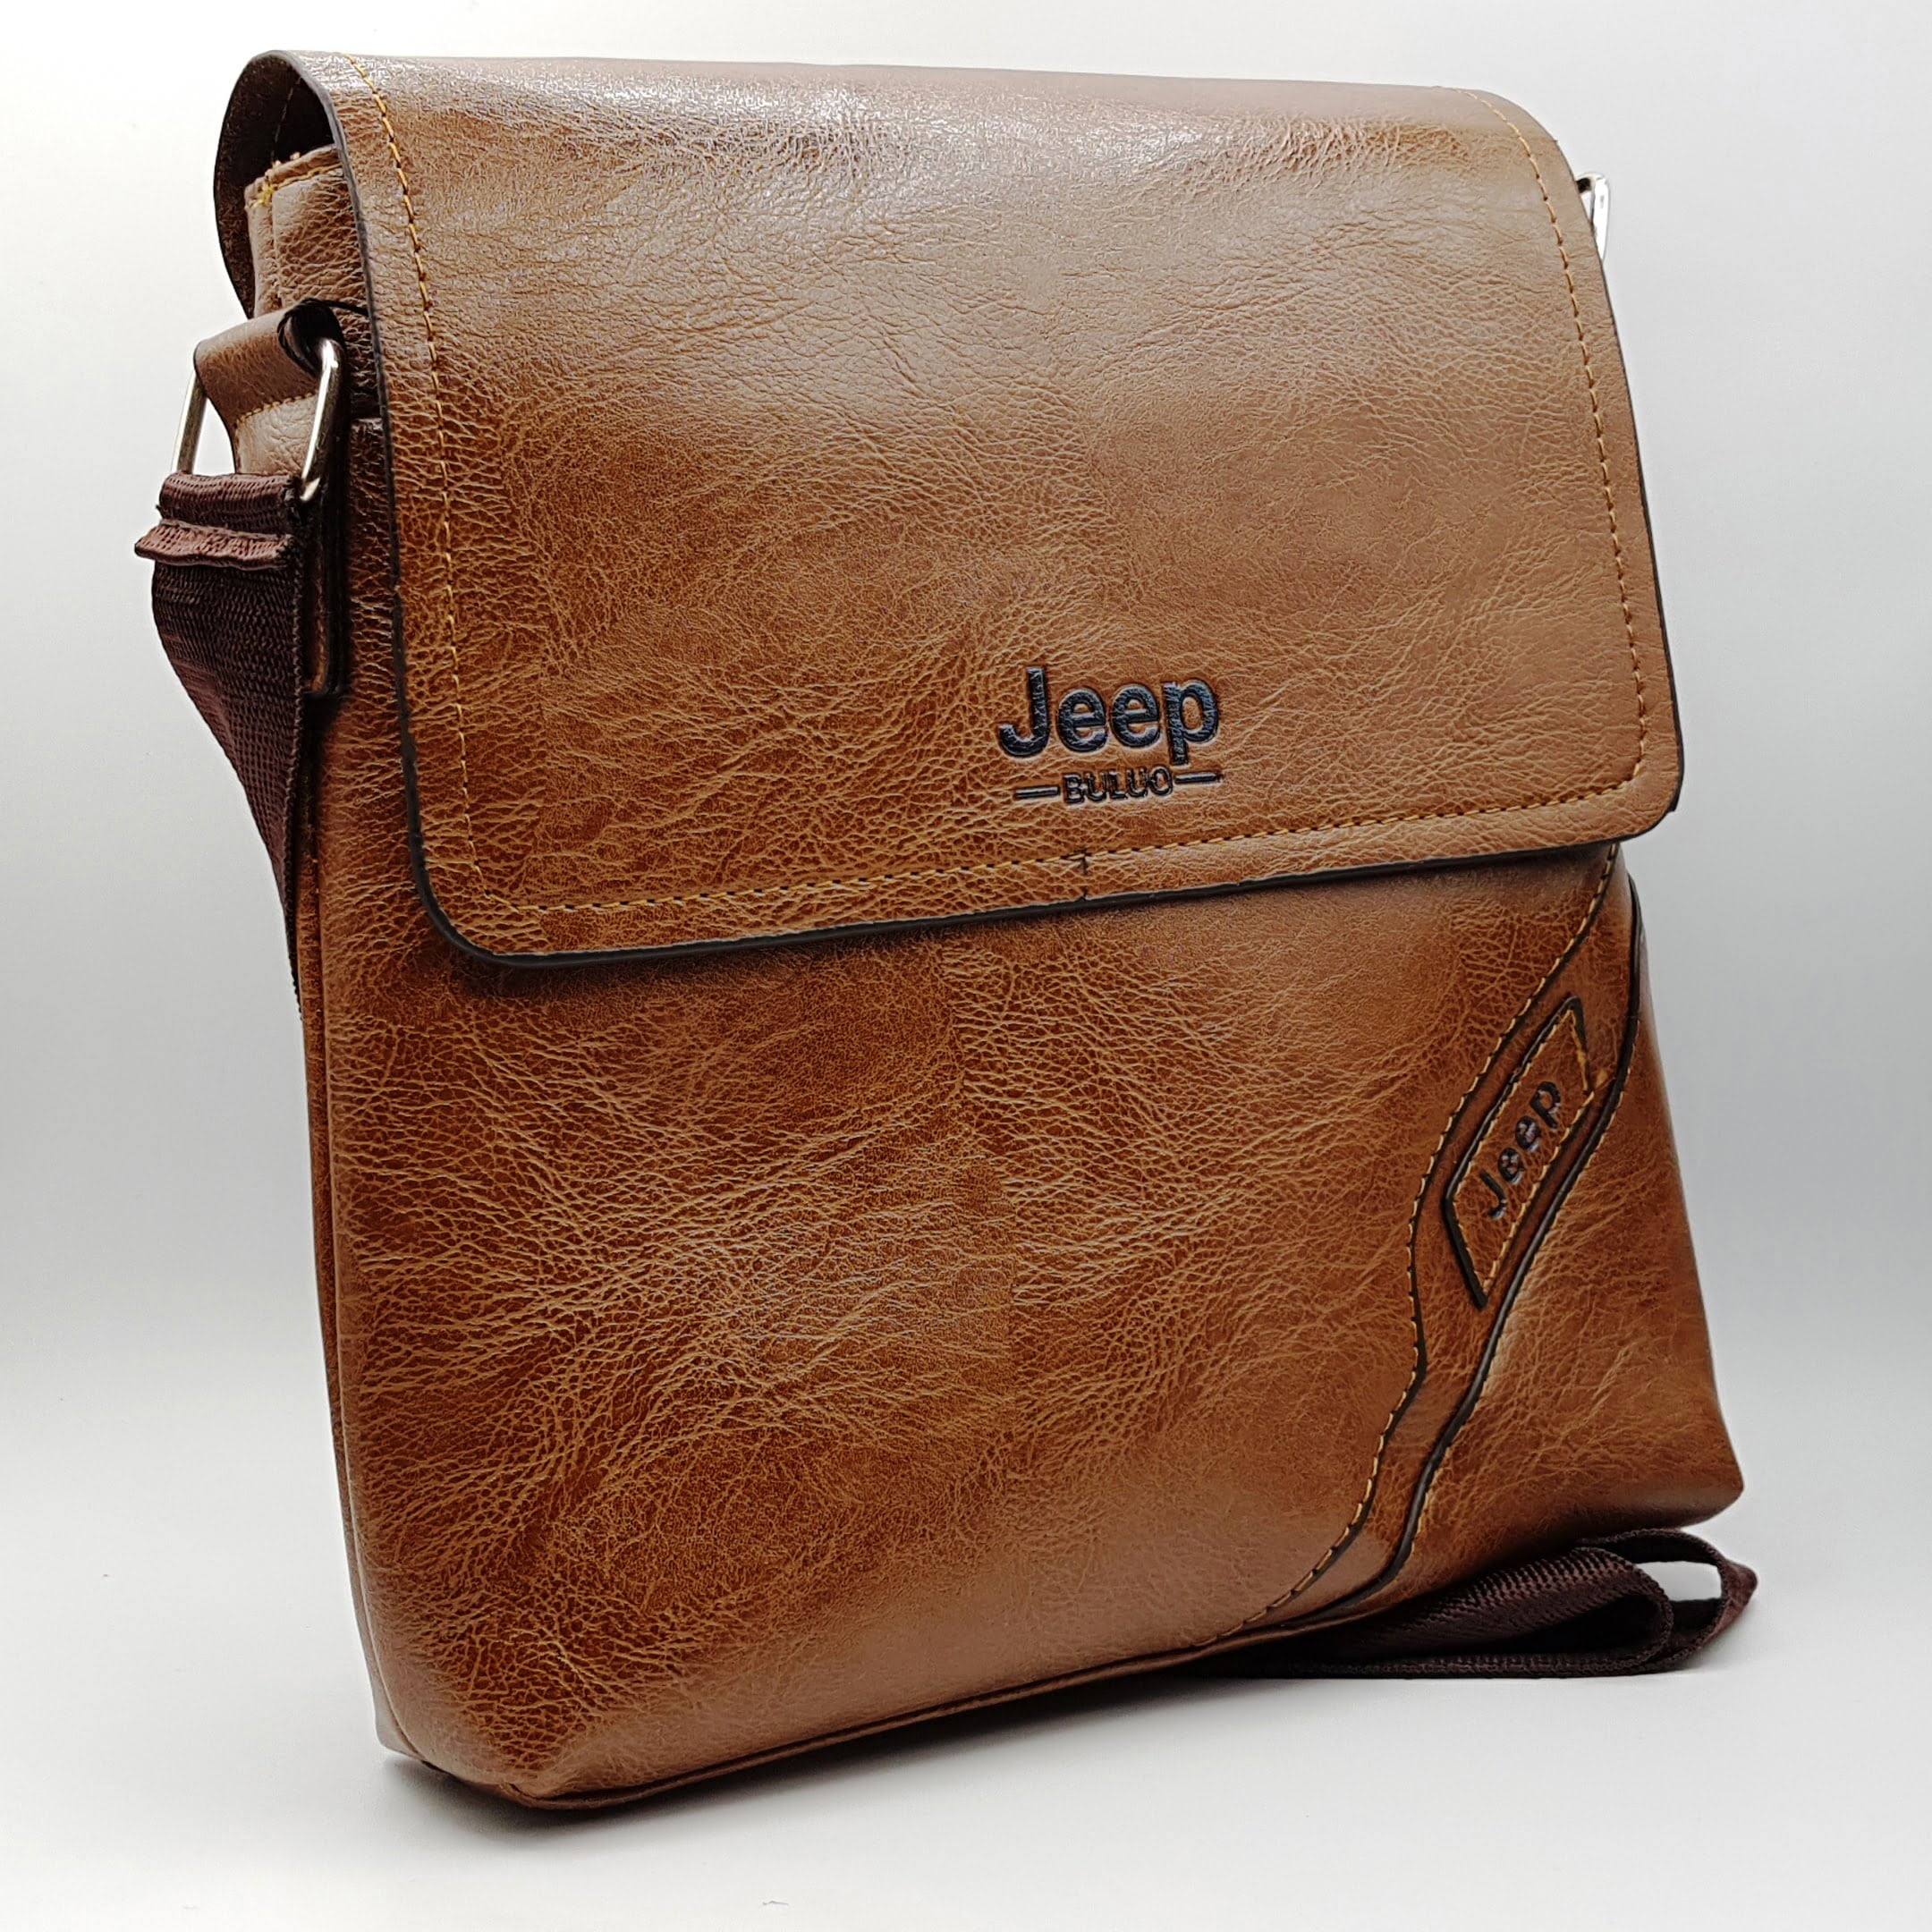 jeep bags online